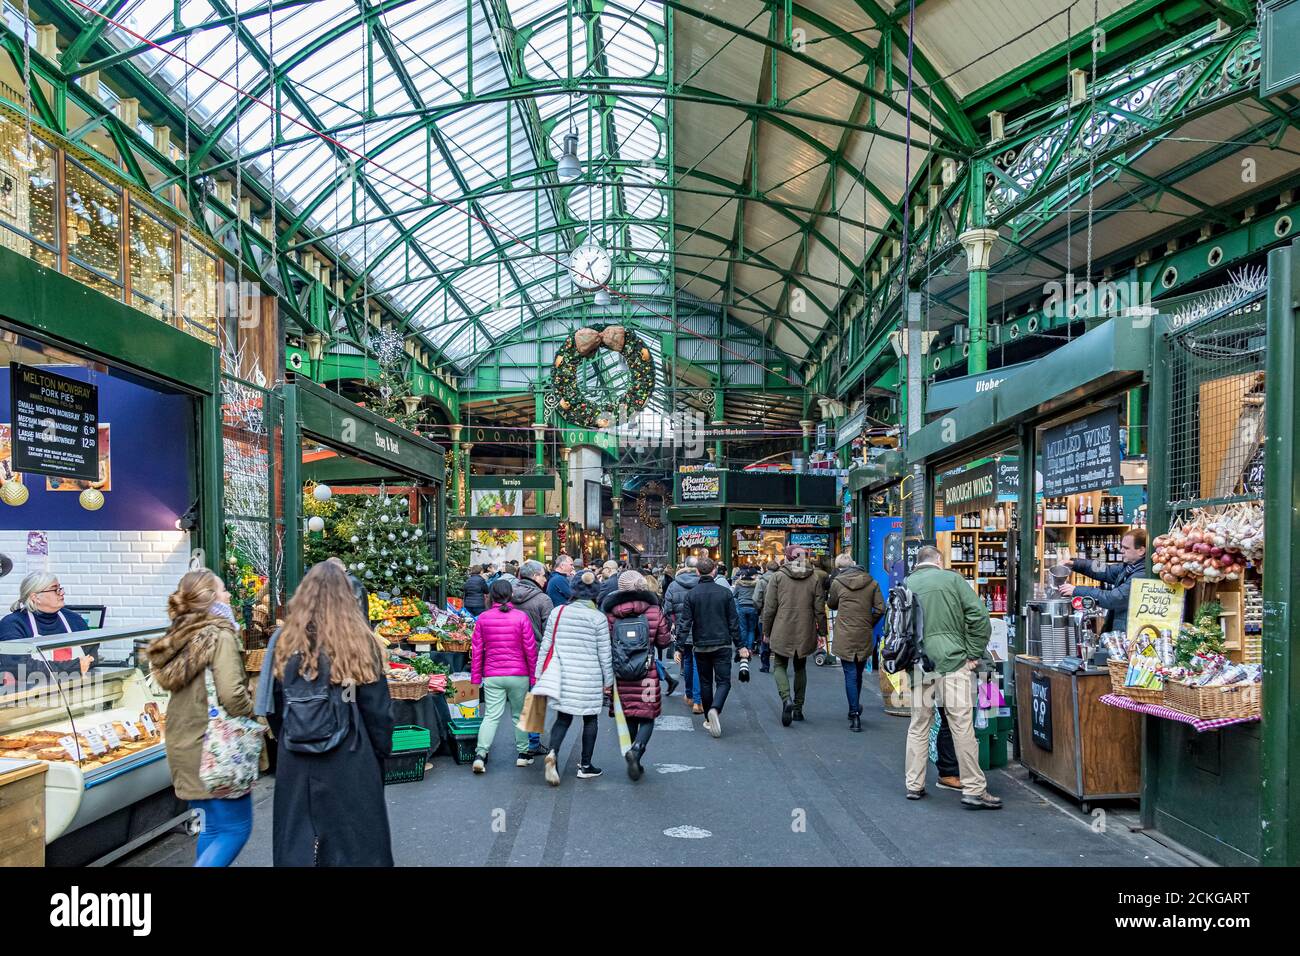 People shopping and browsing at the market stalls under the glass and wrought iron roof at Borough Market, Southwark,London Stock Photo